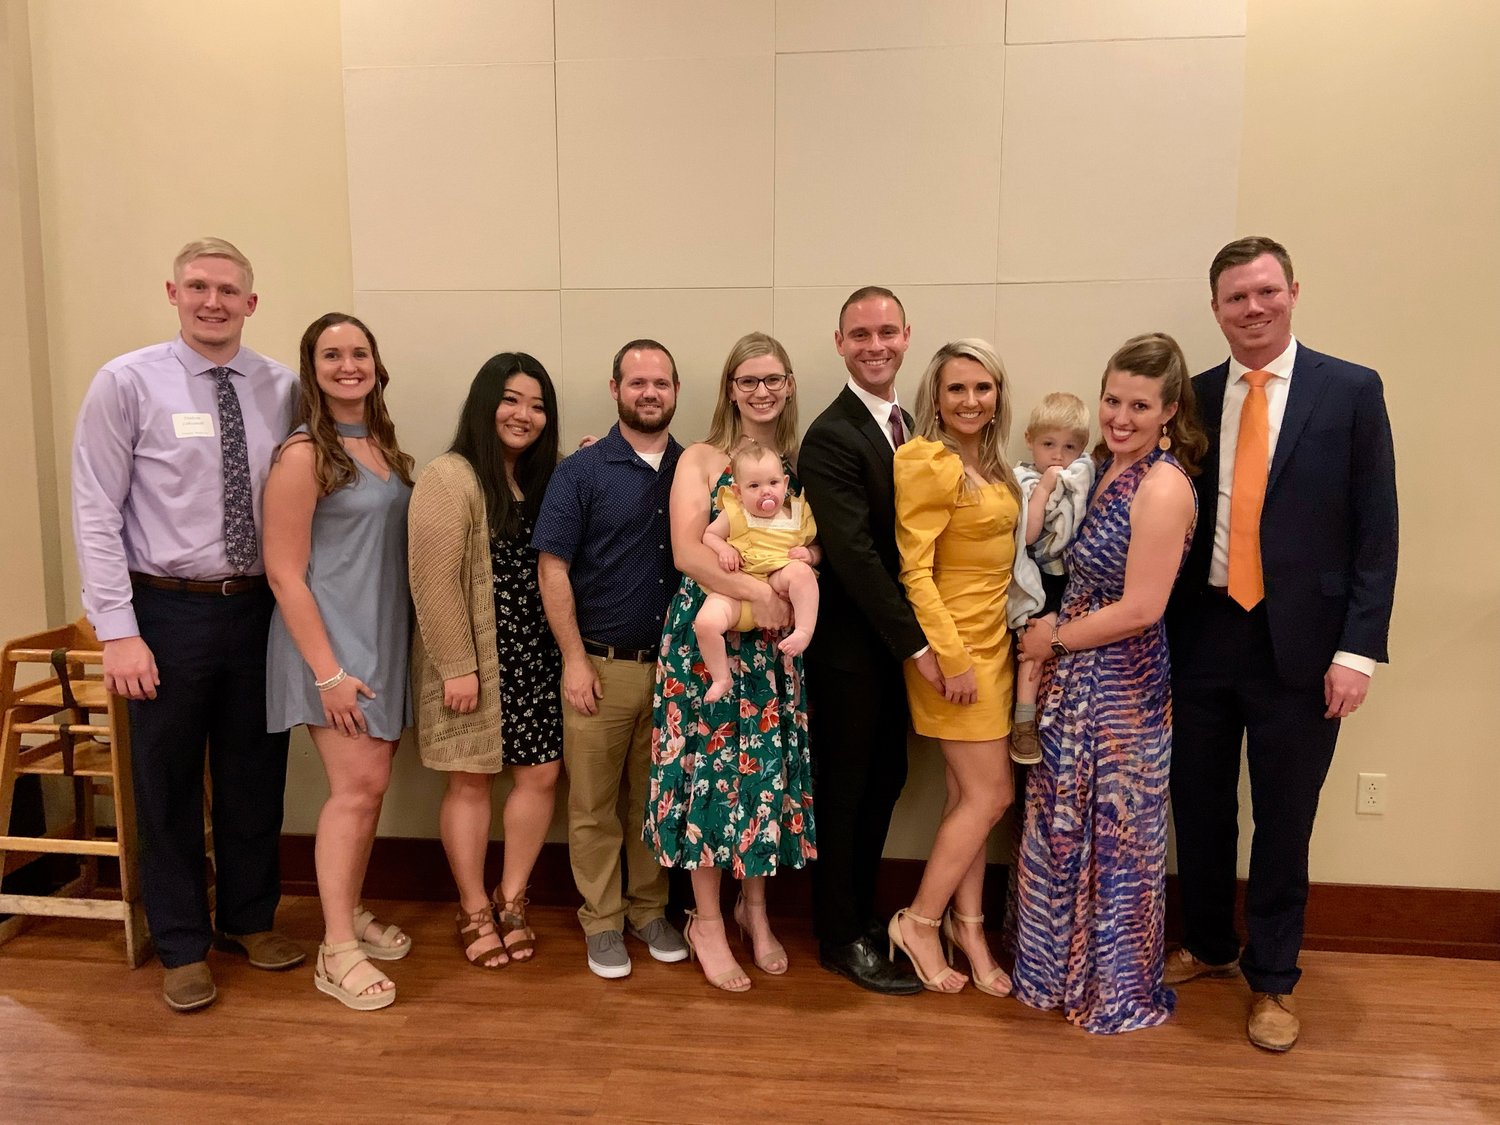 Several new physicians have joined or will join the Bothwell Regional Health Center medical team, with the new Bothwell-University of Missouri Rural Family Medicine Residency being a leading reason for them to choose Bothwell. Shown here with their spouses and family following their recent residency graduation program are from left, Dr. Dalton Lohsandt (projected to arrive in 2022 or 2023) and Kelly Lohsandt; Ellie Euer, residency program coordinator; Eddie Emery and Dr. Alyssa Emery (holding Lucy Emery); Greg Djinis and Dr. Lisa Wadowski; and Dr. Misty Todd (holding Gabe Emery) and Dr. Matthew Roehrs.